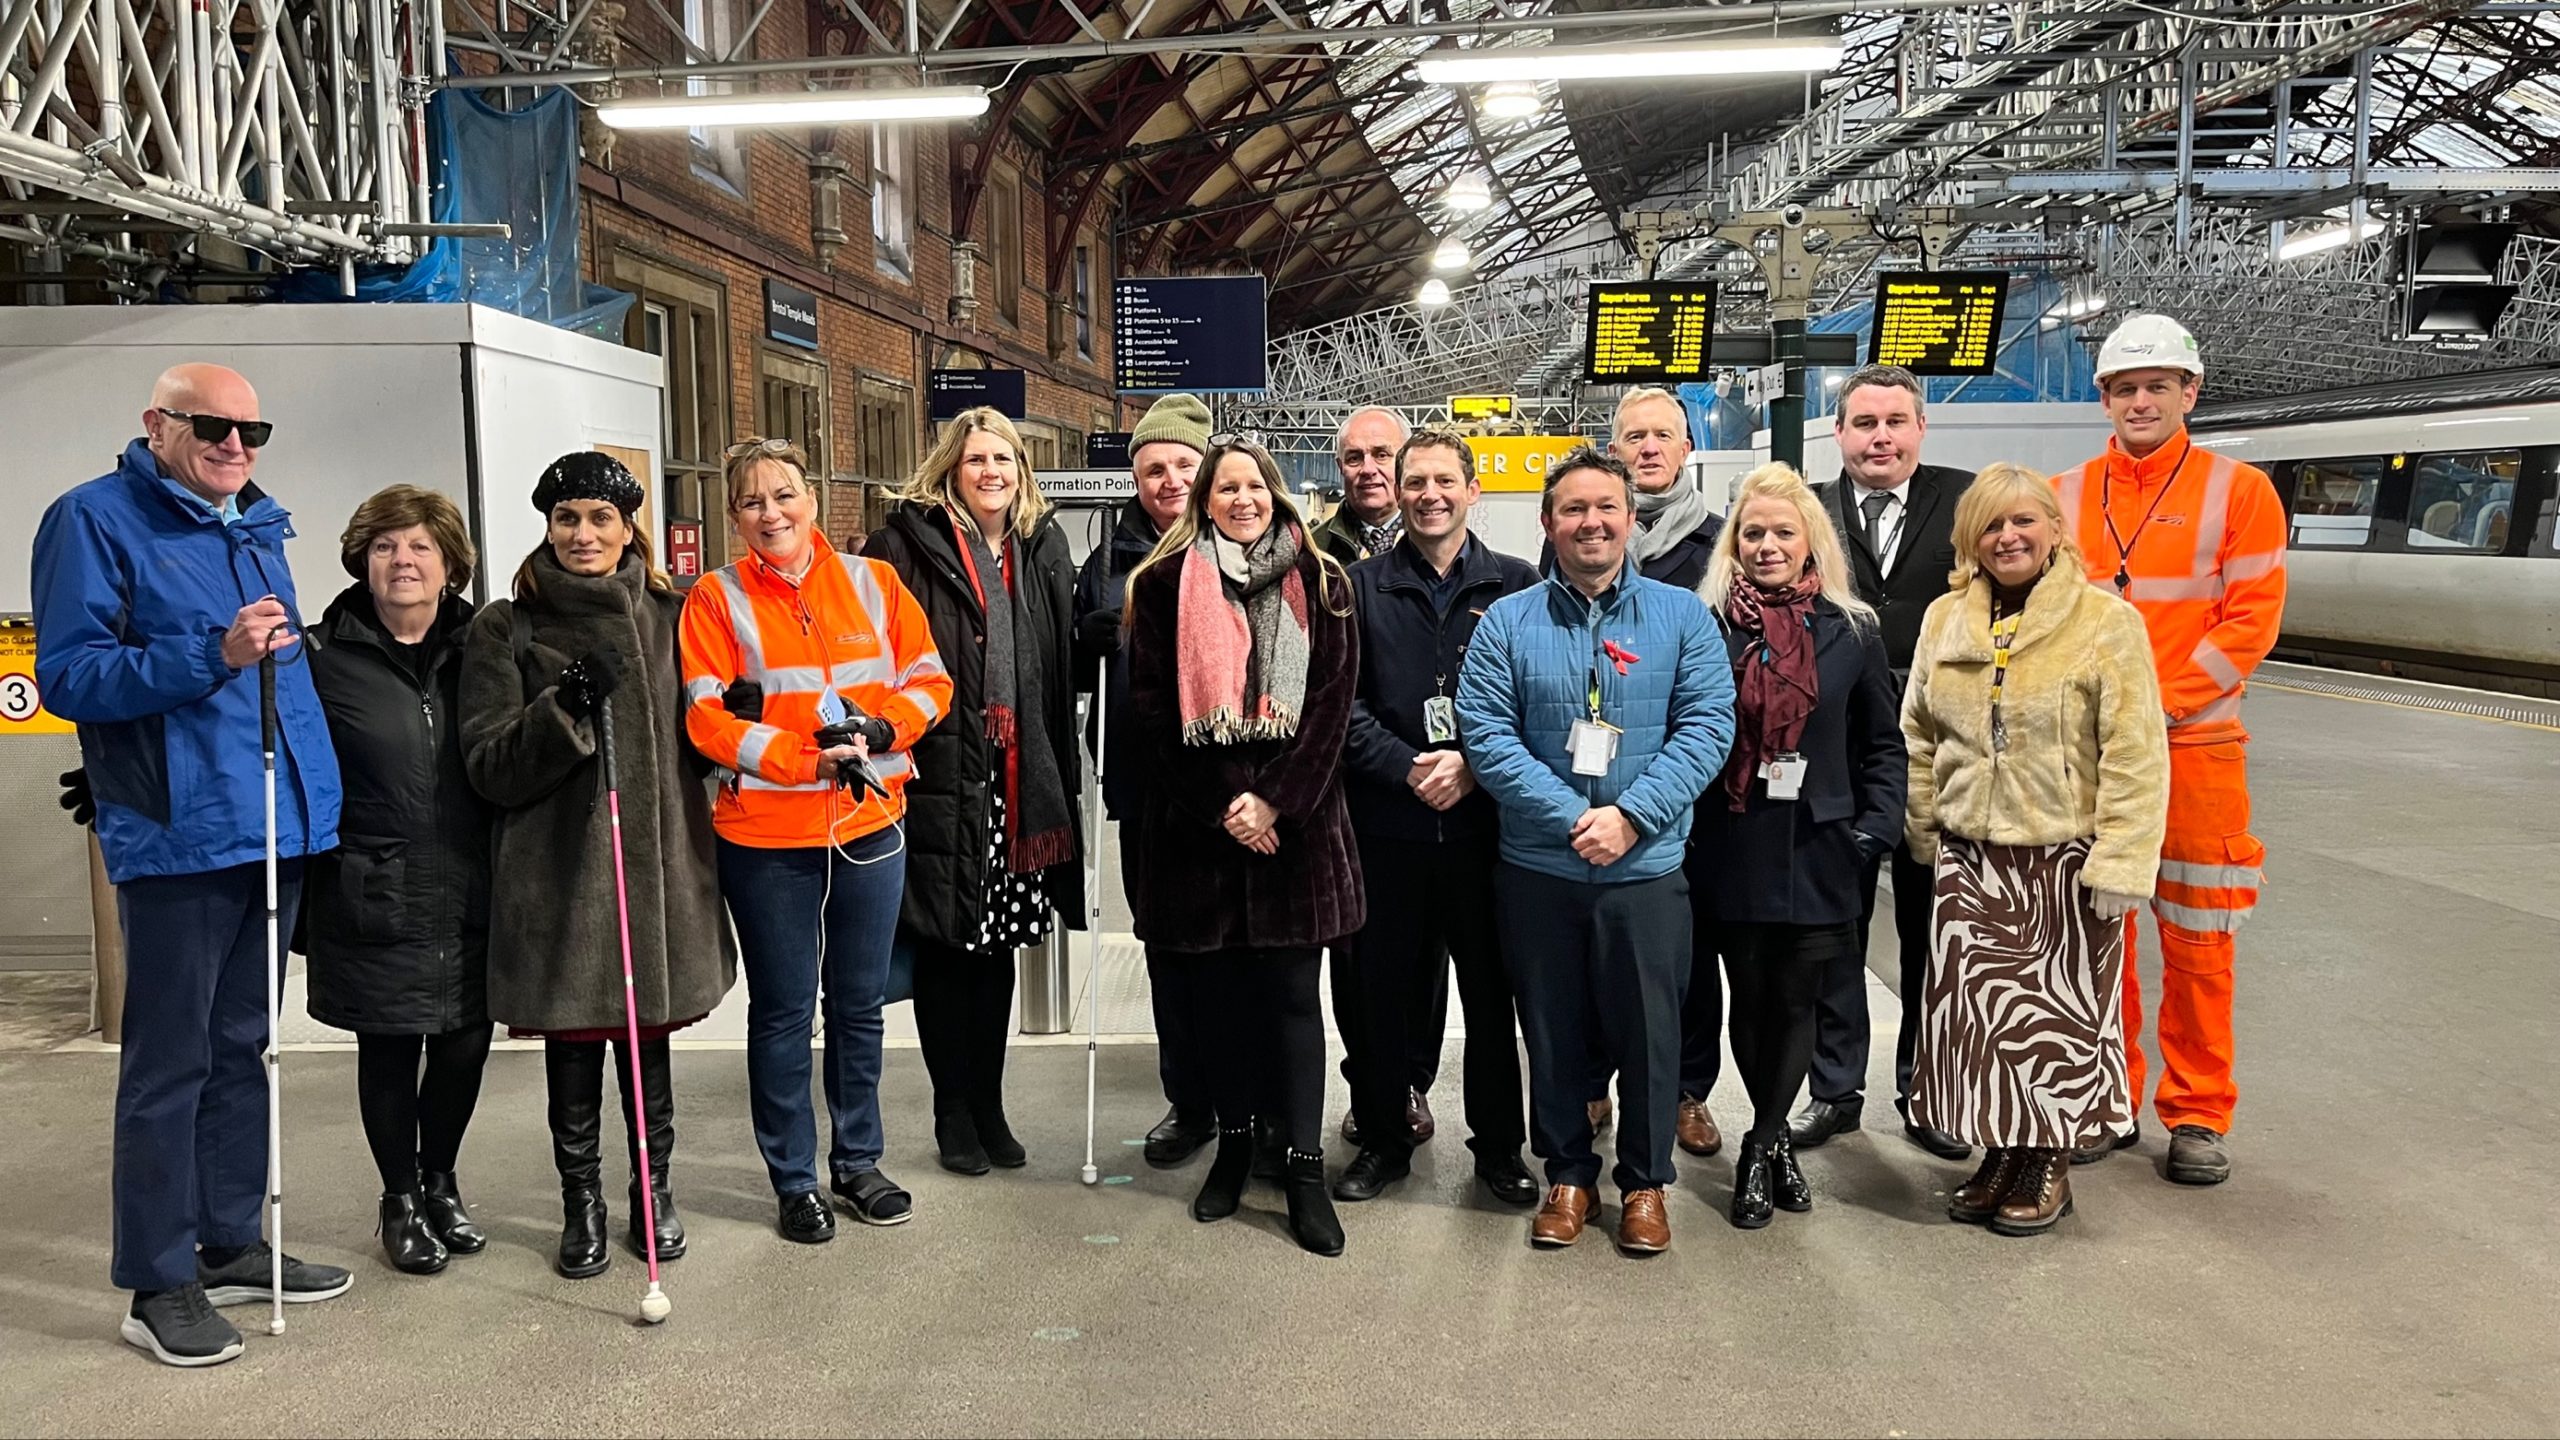 Network Rail staff and Bristol Sight Loss Council members, with Thomas Pocklington Trust Staff, inside Bristol Temple Meads railway station. They are stood in a line facing the camera. They are smiling.